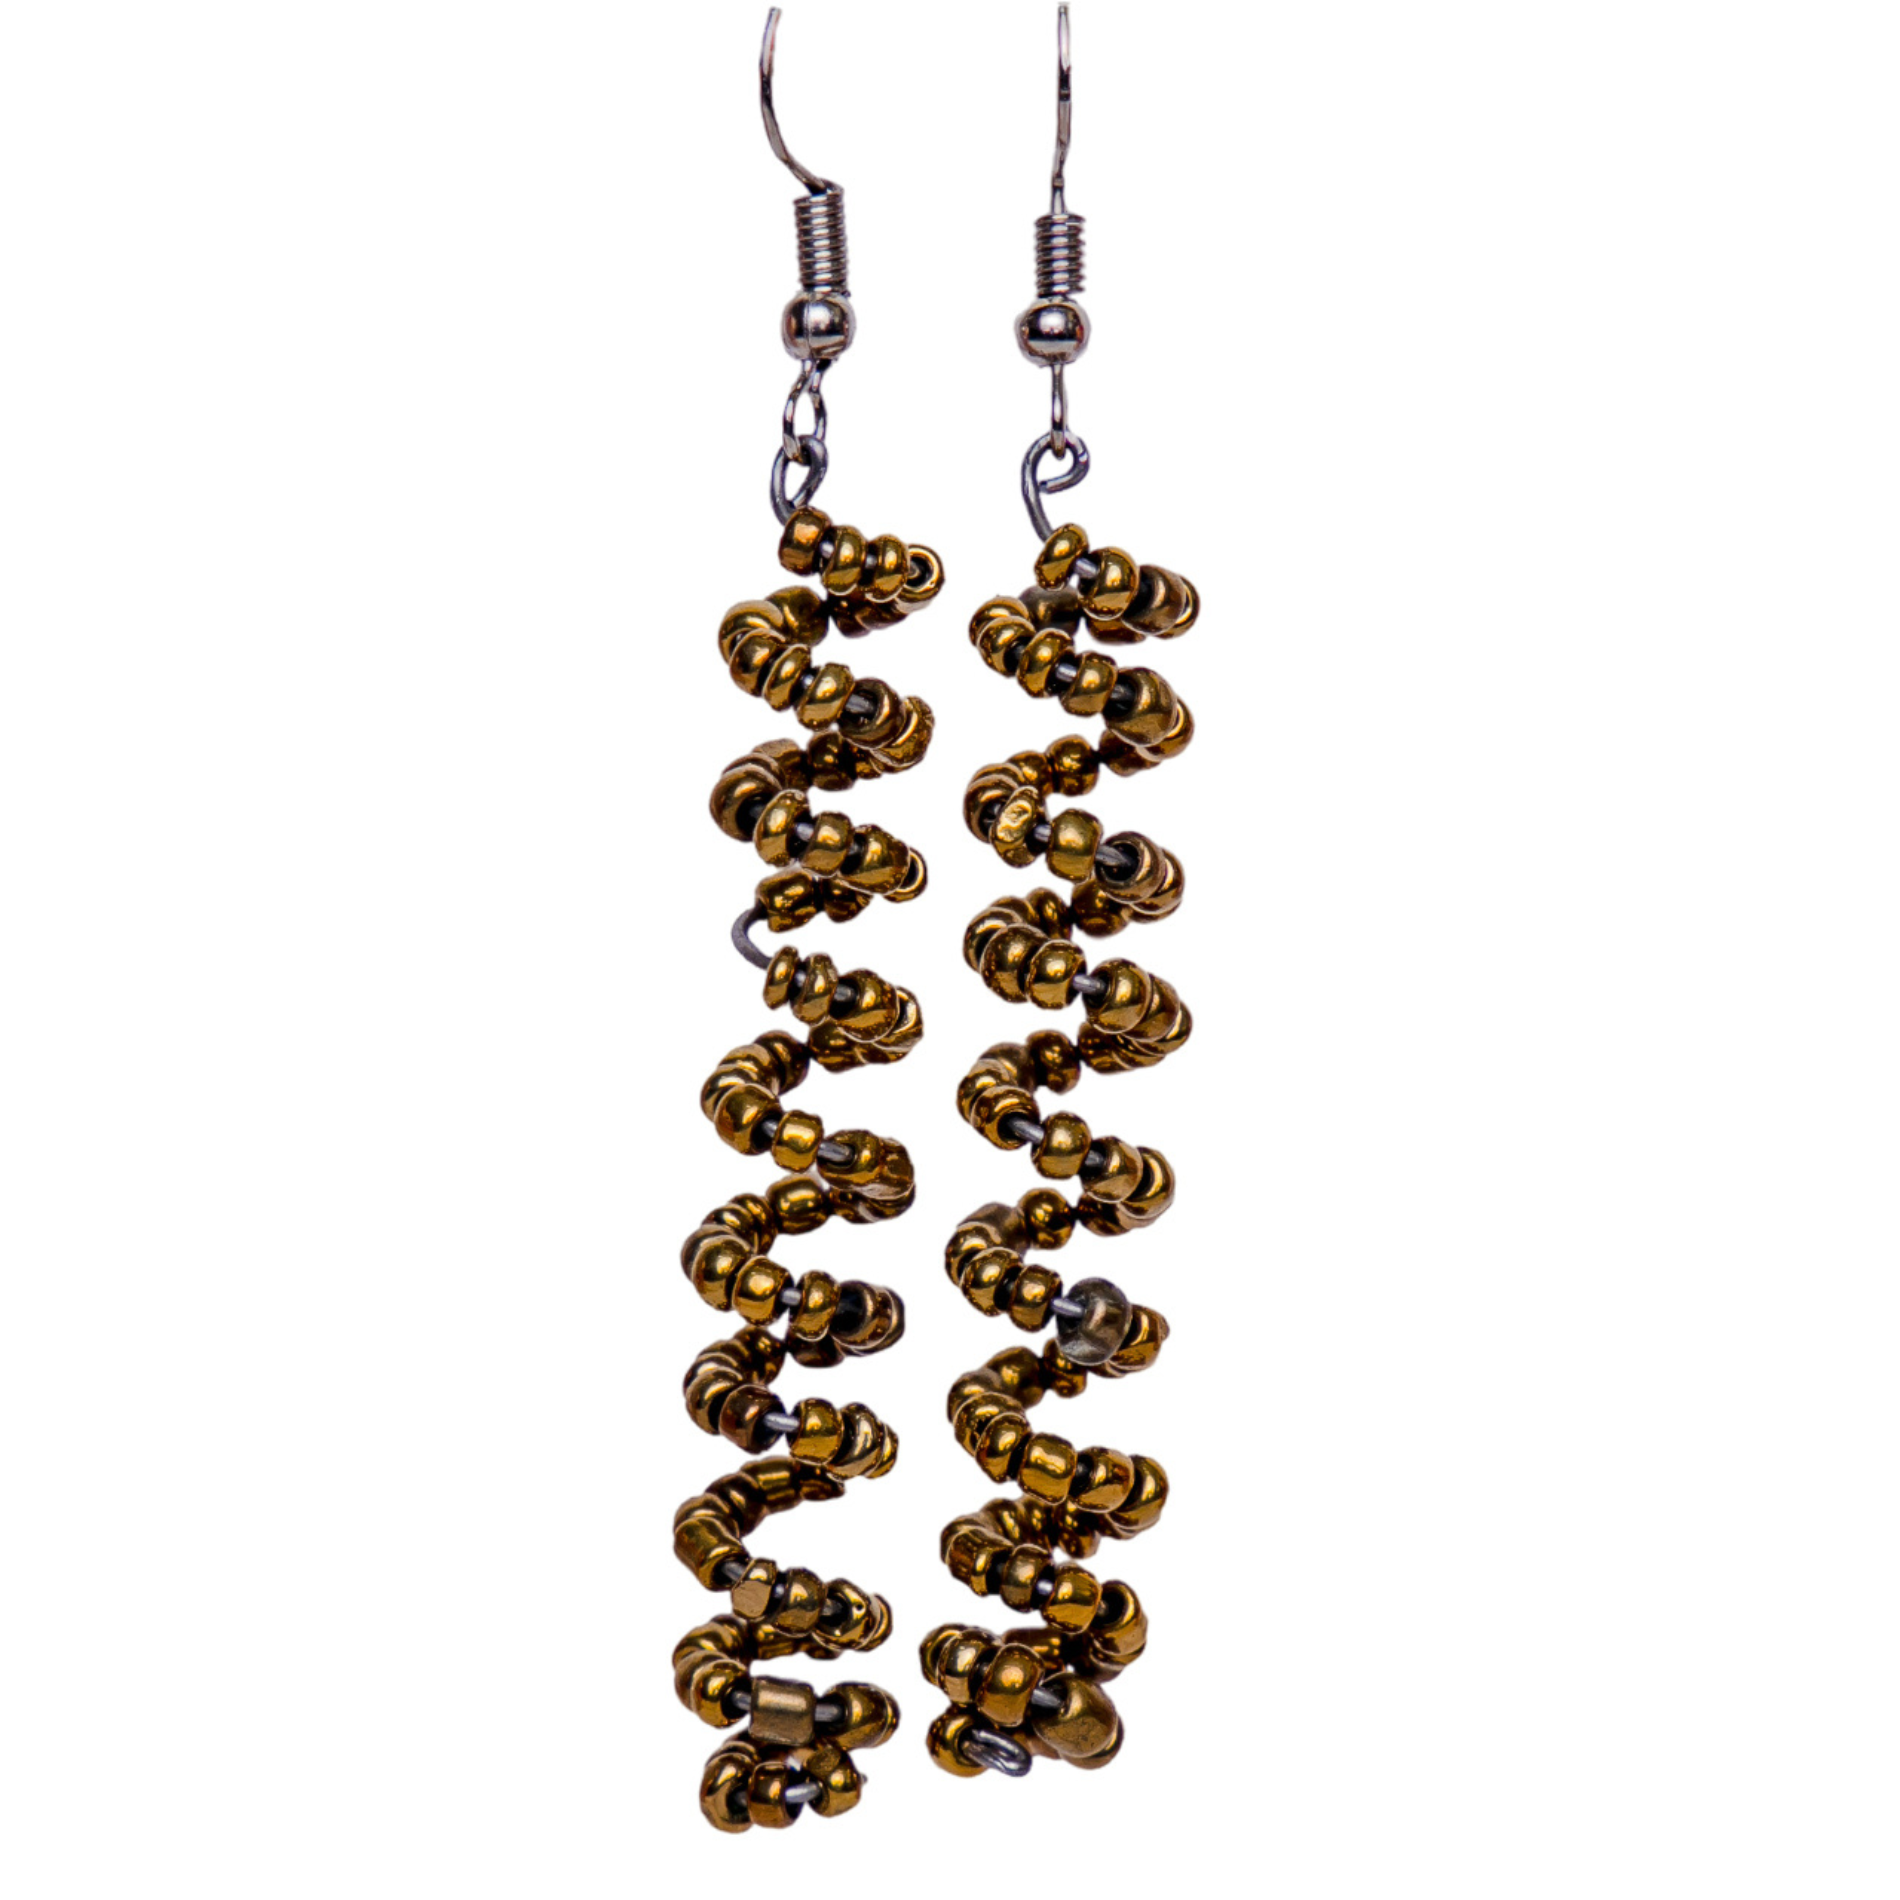 Spiral Earrings handmade with golden beads and silver plated brass